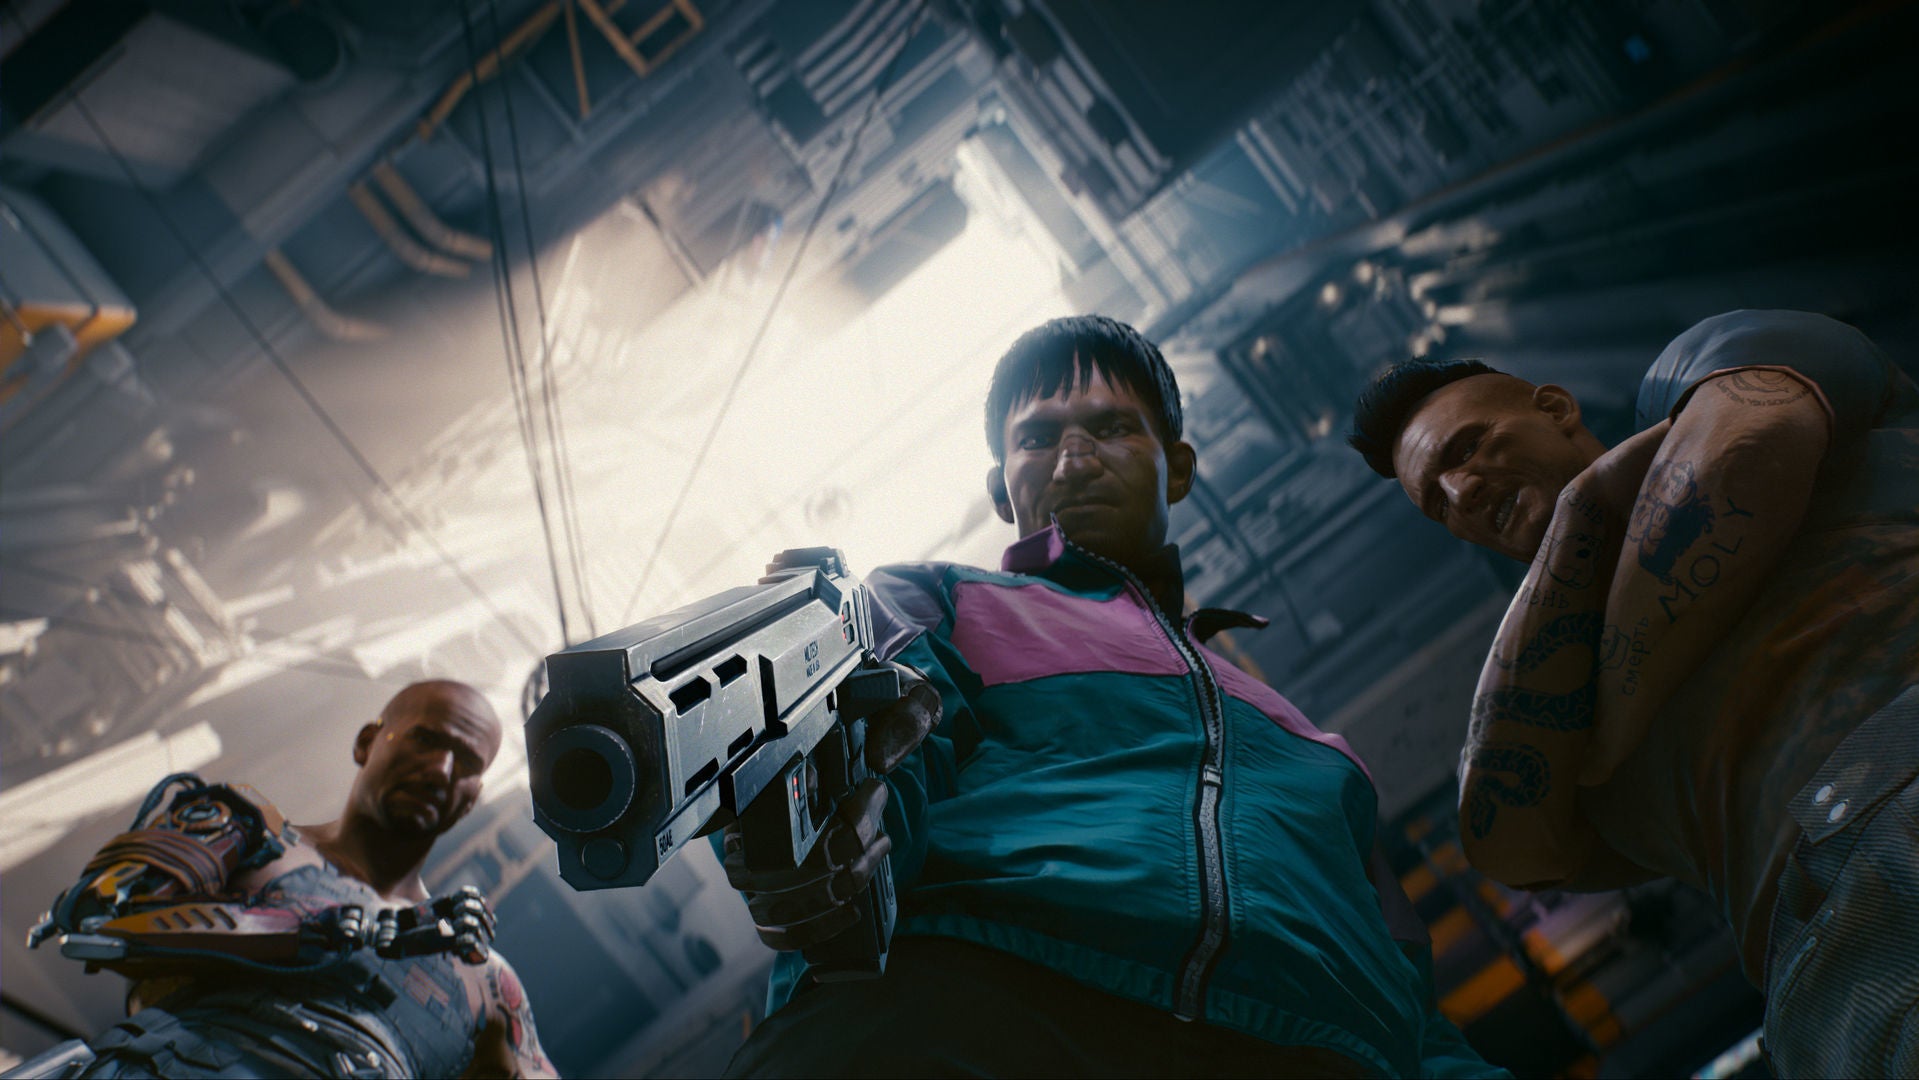 Image for You can attack most people in Cyberpunk 2077, but kids and story NPCs are off limits